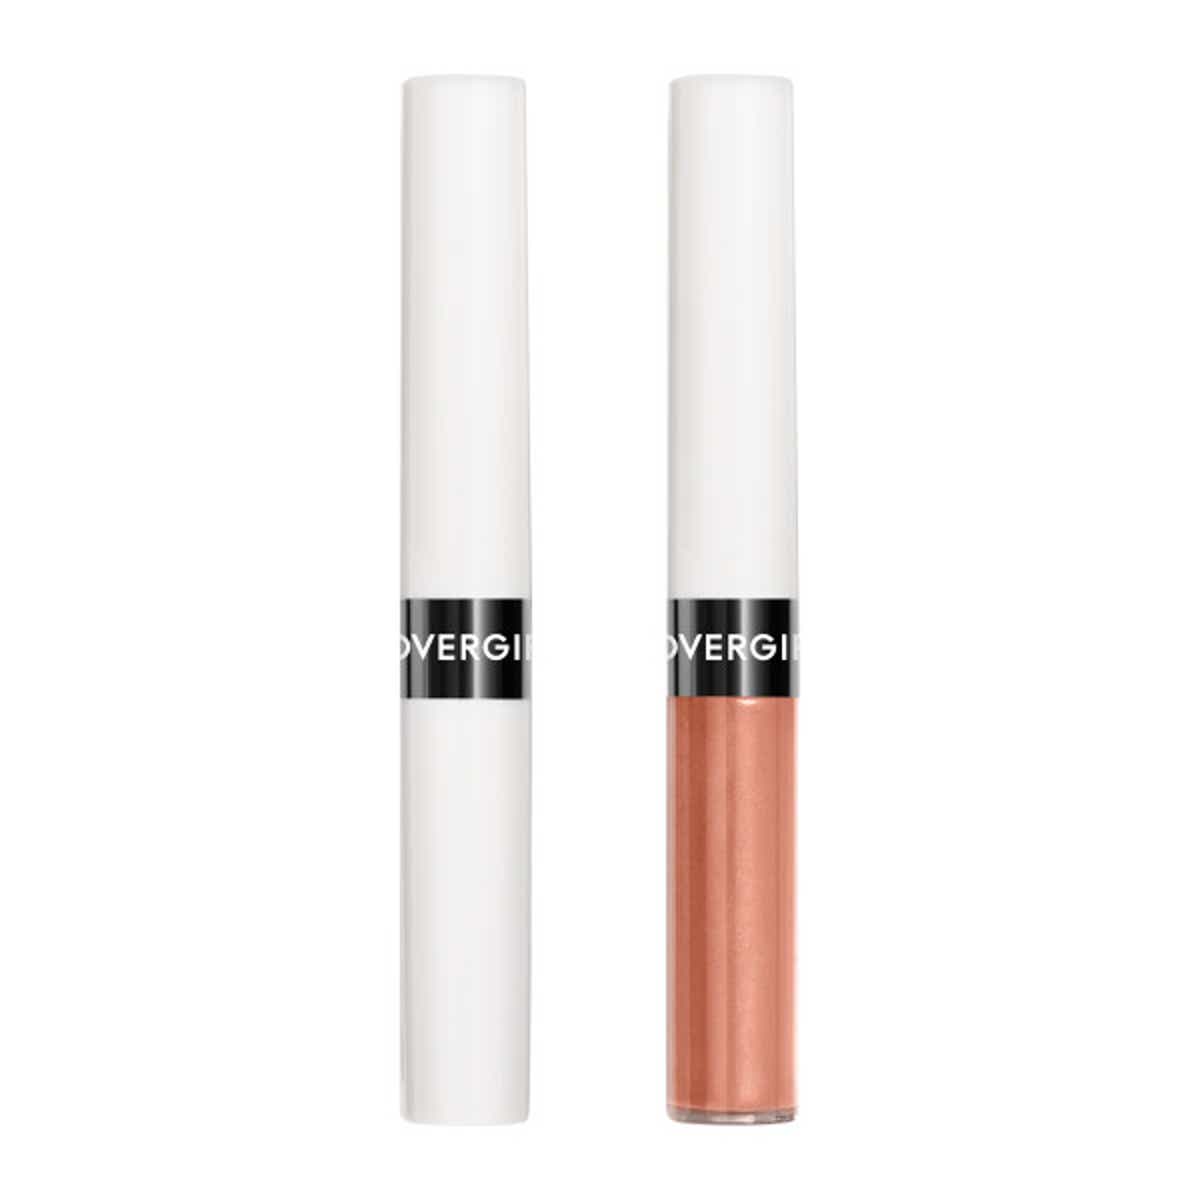 Outlast Moisturizing Lip Color with Topcoat